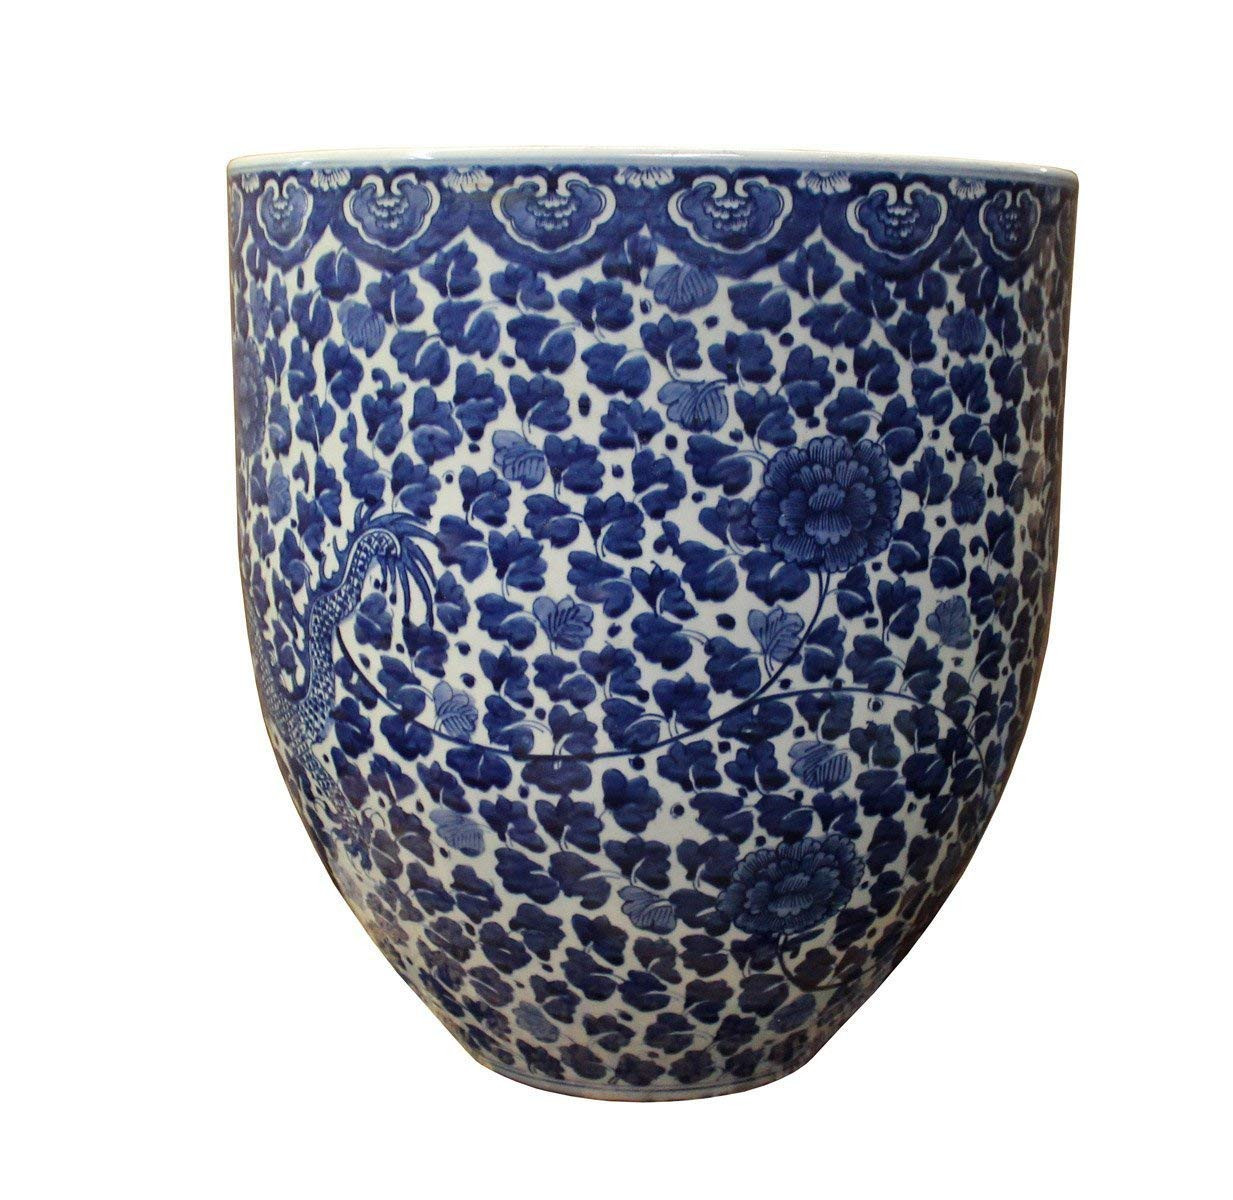 12 Spectacular Ming Dynasty Blue and White Vase 2024 free download ming dynasty blue and white vase of amazon com chinese blue white dragon flower porcelain pot vase inside amazon com chinese blue white dragon flower porcelain pot vase acs2388 home kitchen